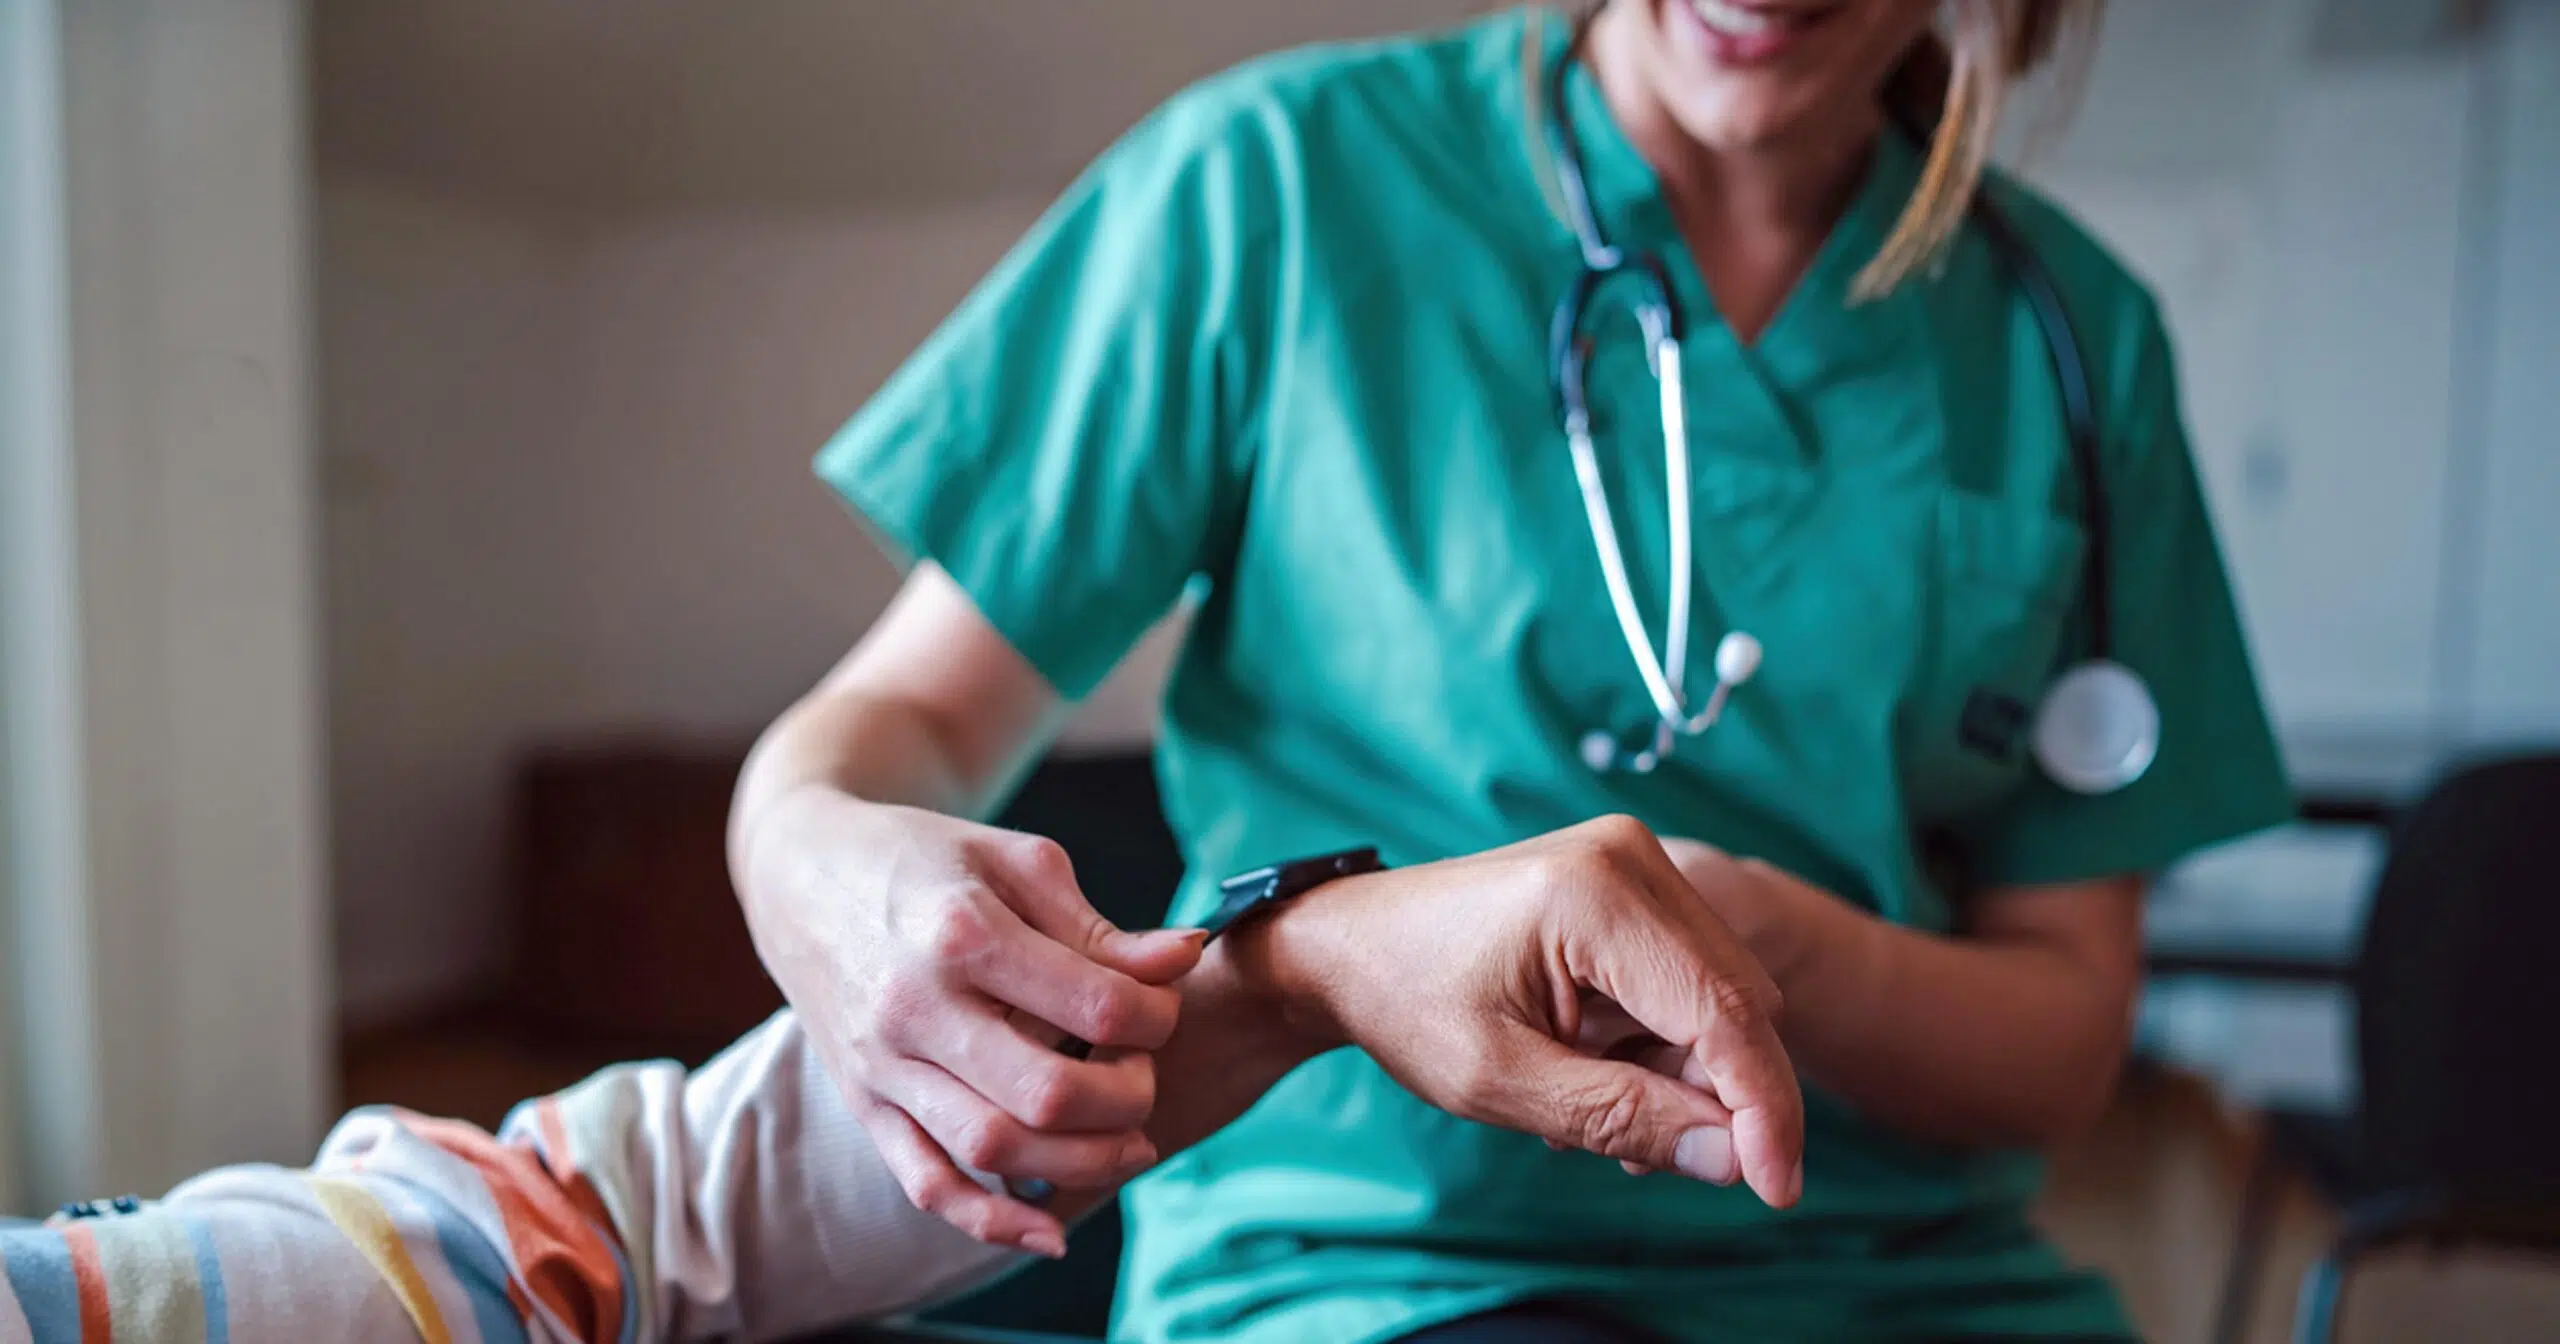 Nurse putting wearable health monitor on a patient